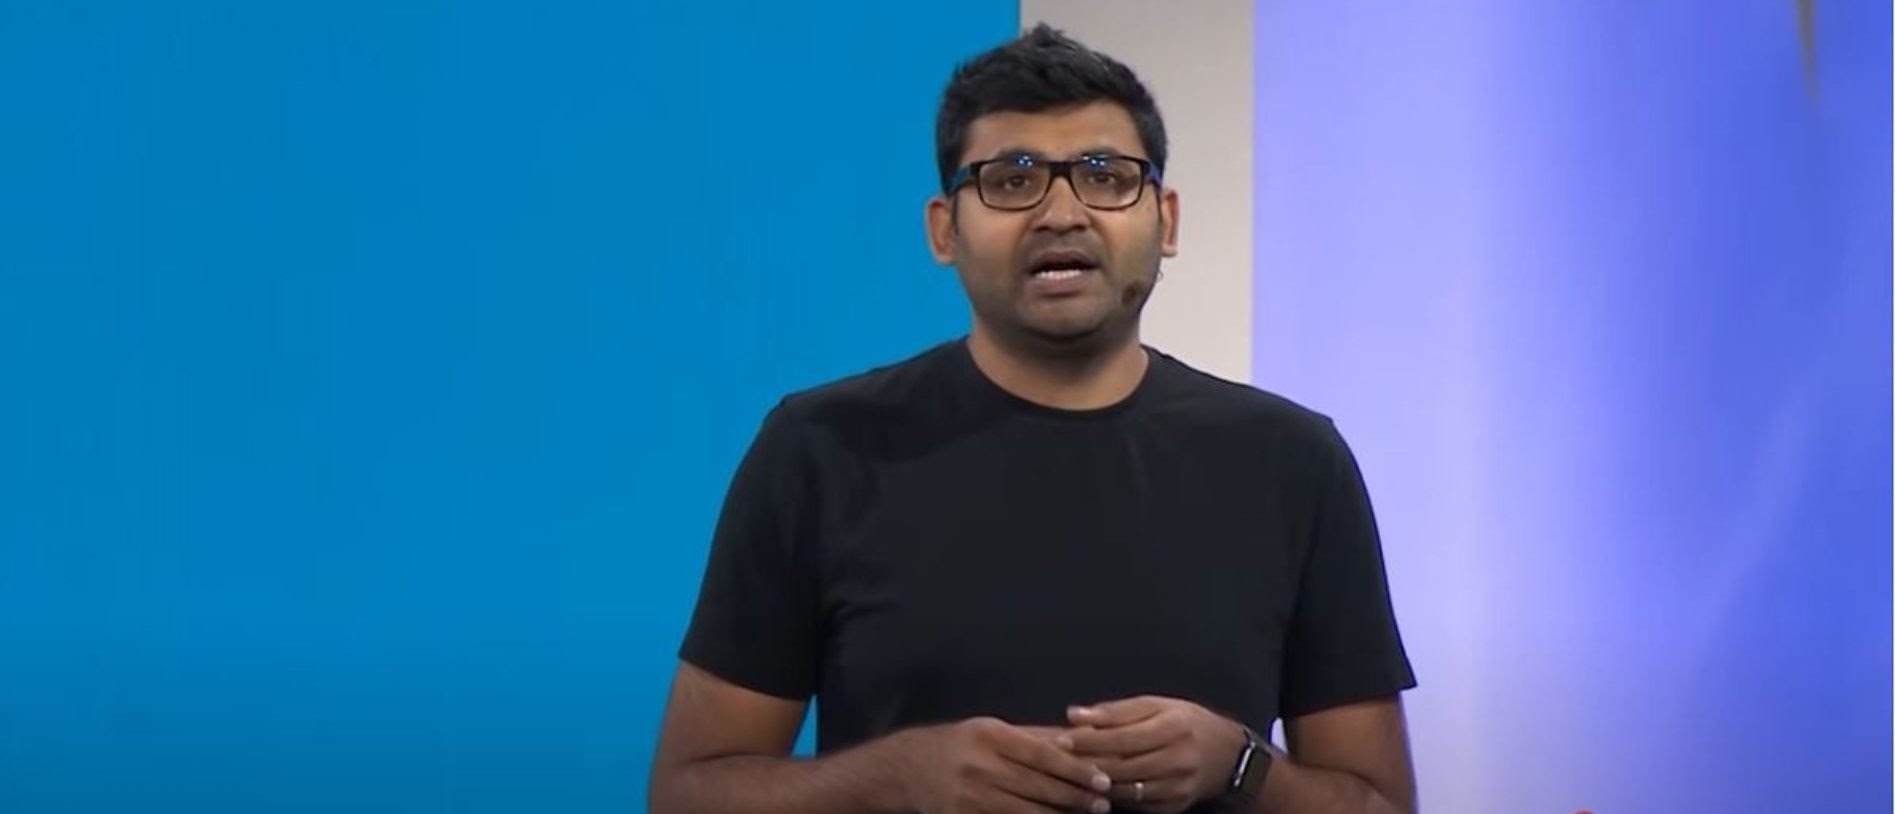 Republicans Warn Of ‘Censorship’ From ‘Radical’ New Twitter CEO Parag Agrawal